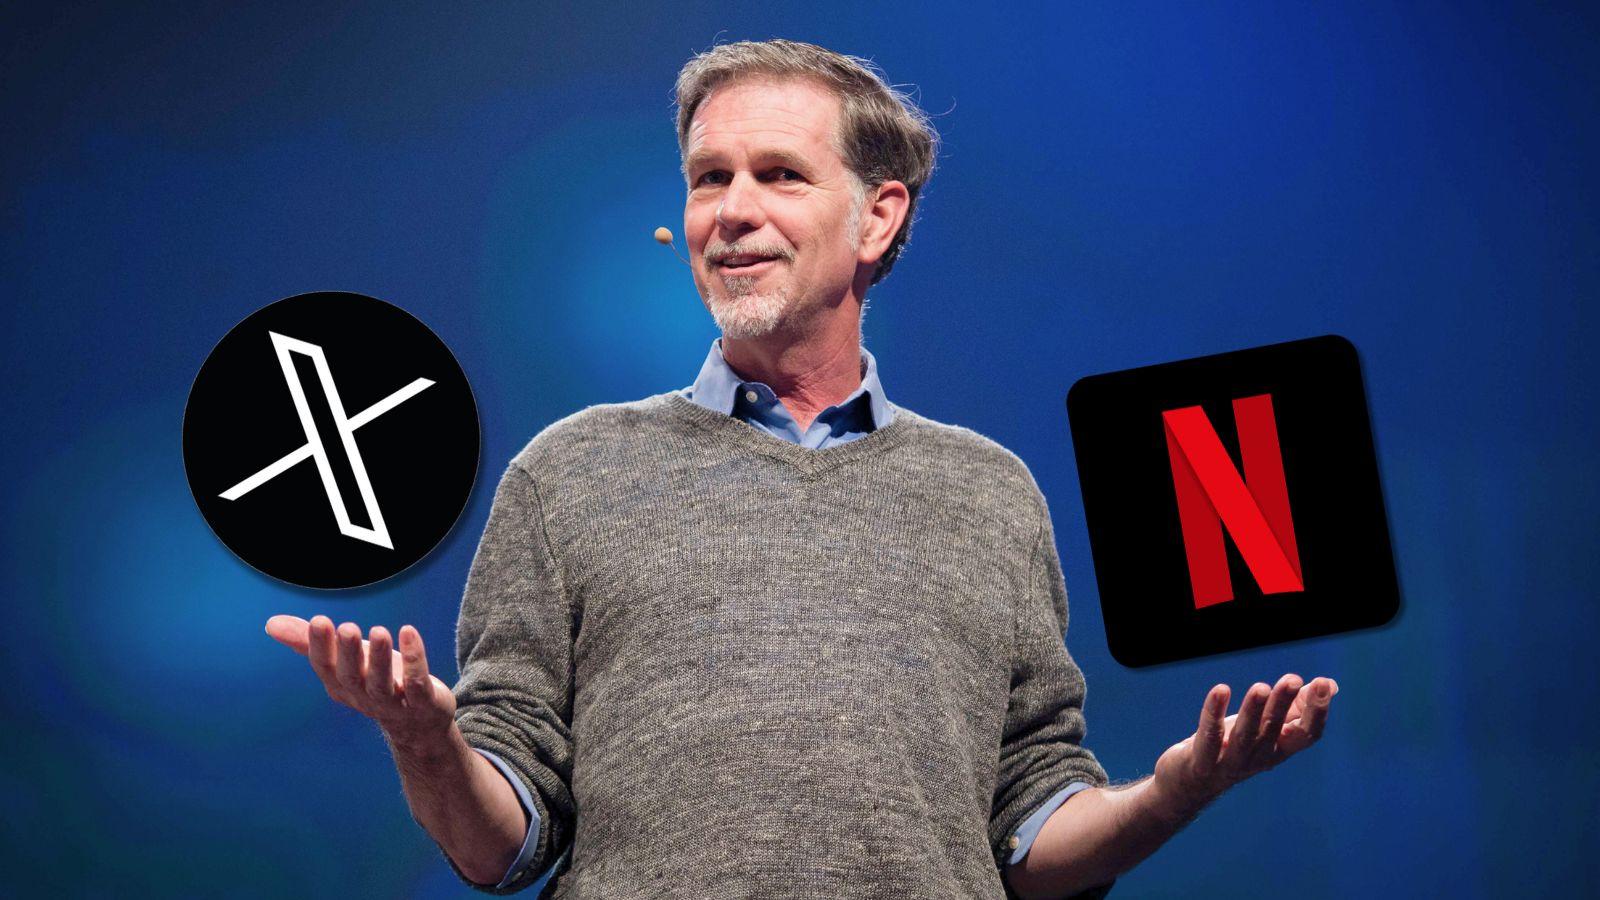 Reed Hastings delivering at Republica in Berlin, the X and Netflix logos are to his right and left.